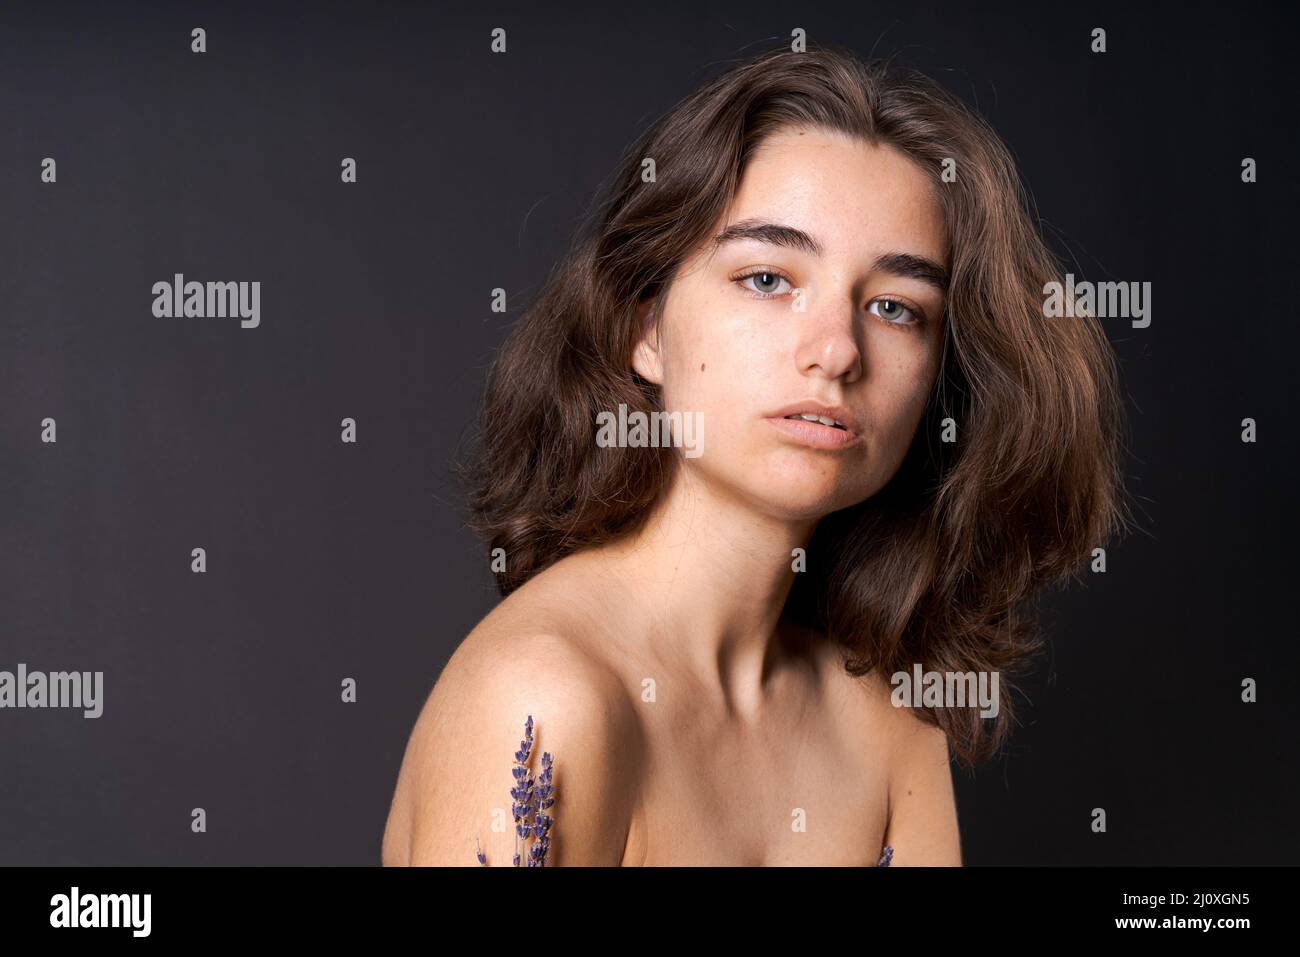 Unshaven armpit concept. Girl is holding lavender flowers in front her armpits. Symbol of unshaven body parts. Body positivity and naturalness. Problems home depilation on black background Stock Photo